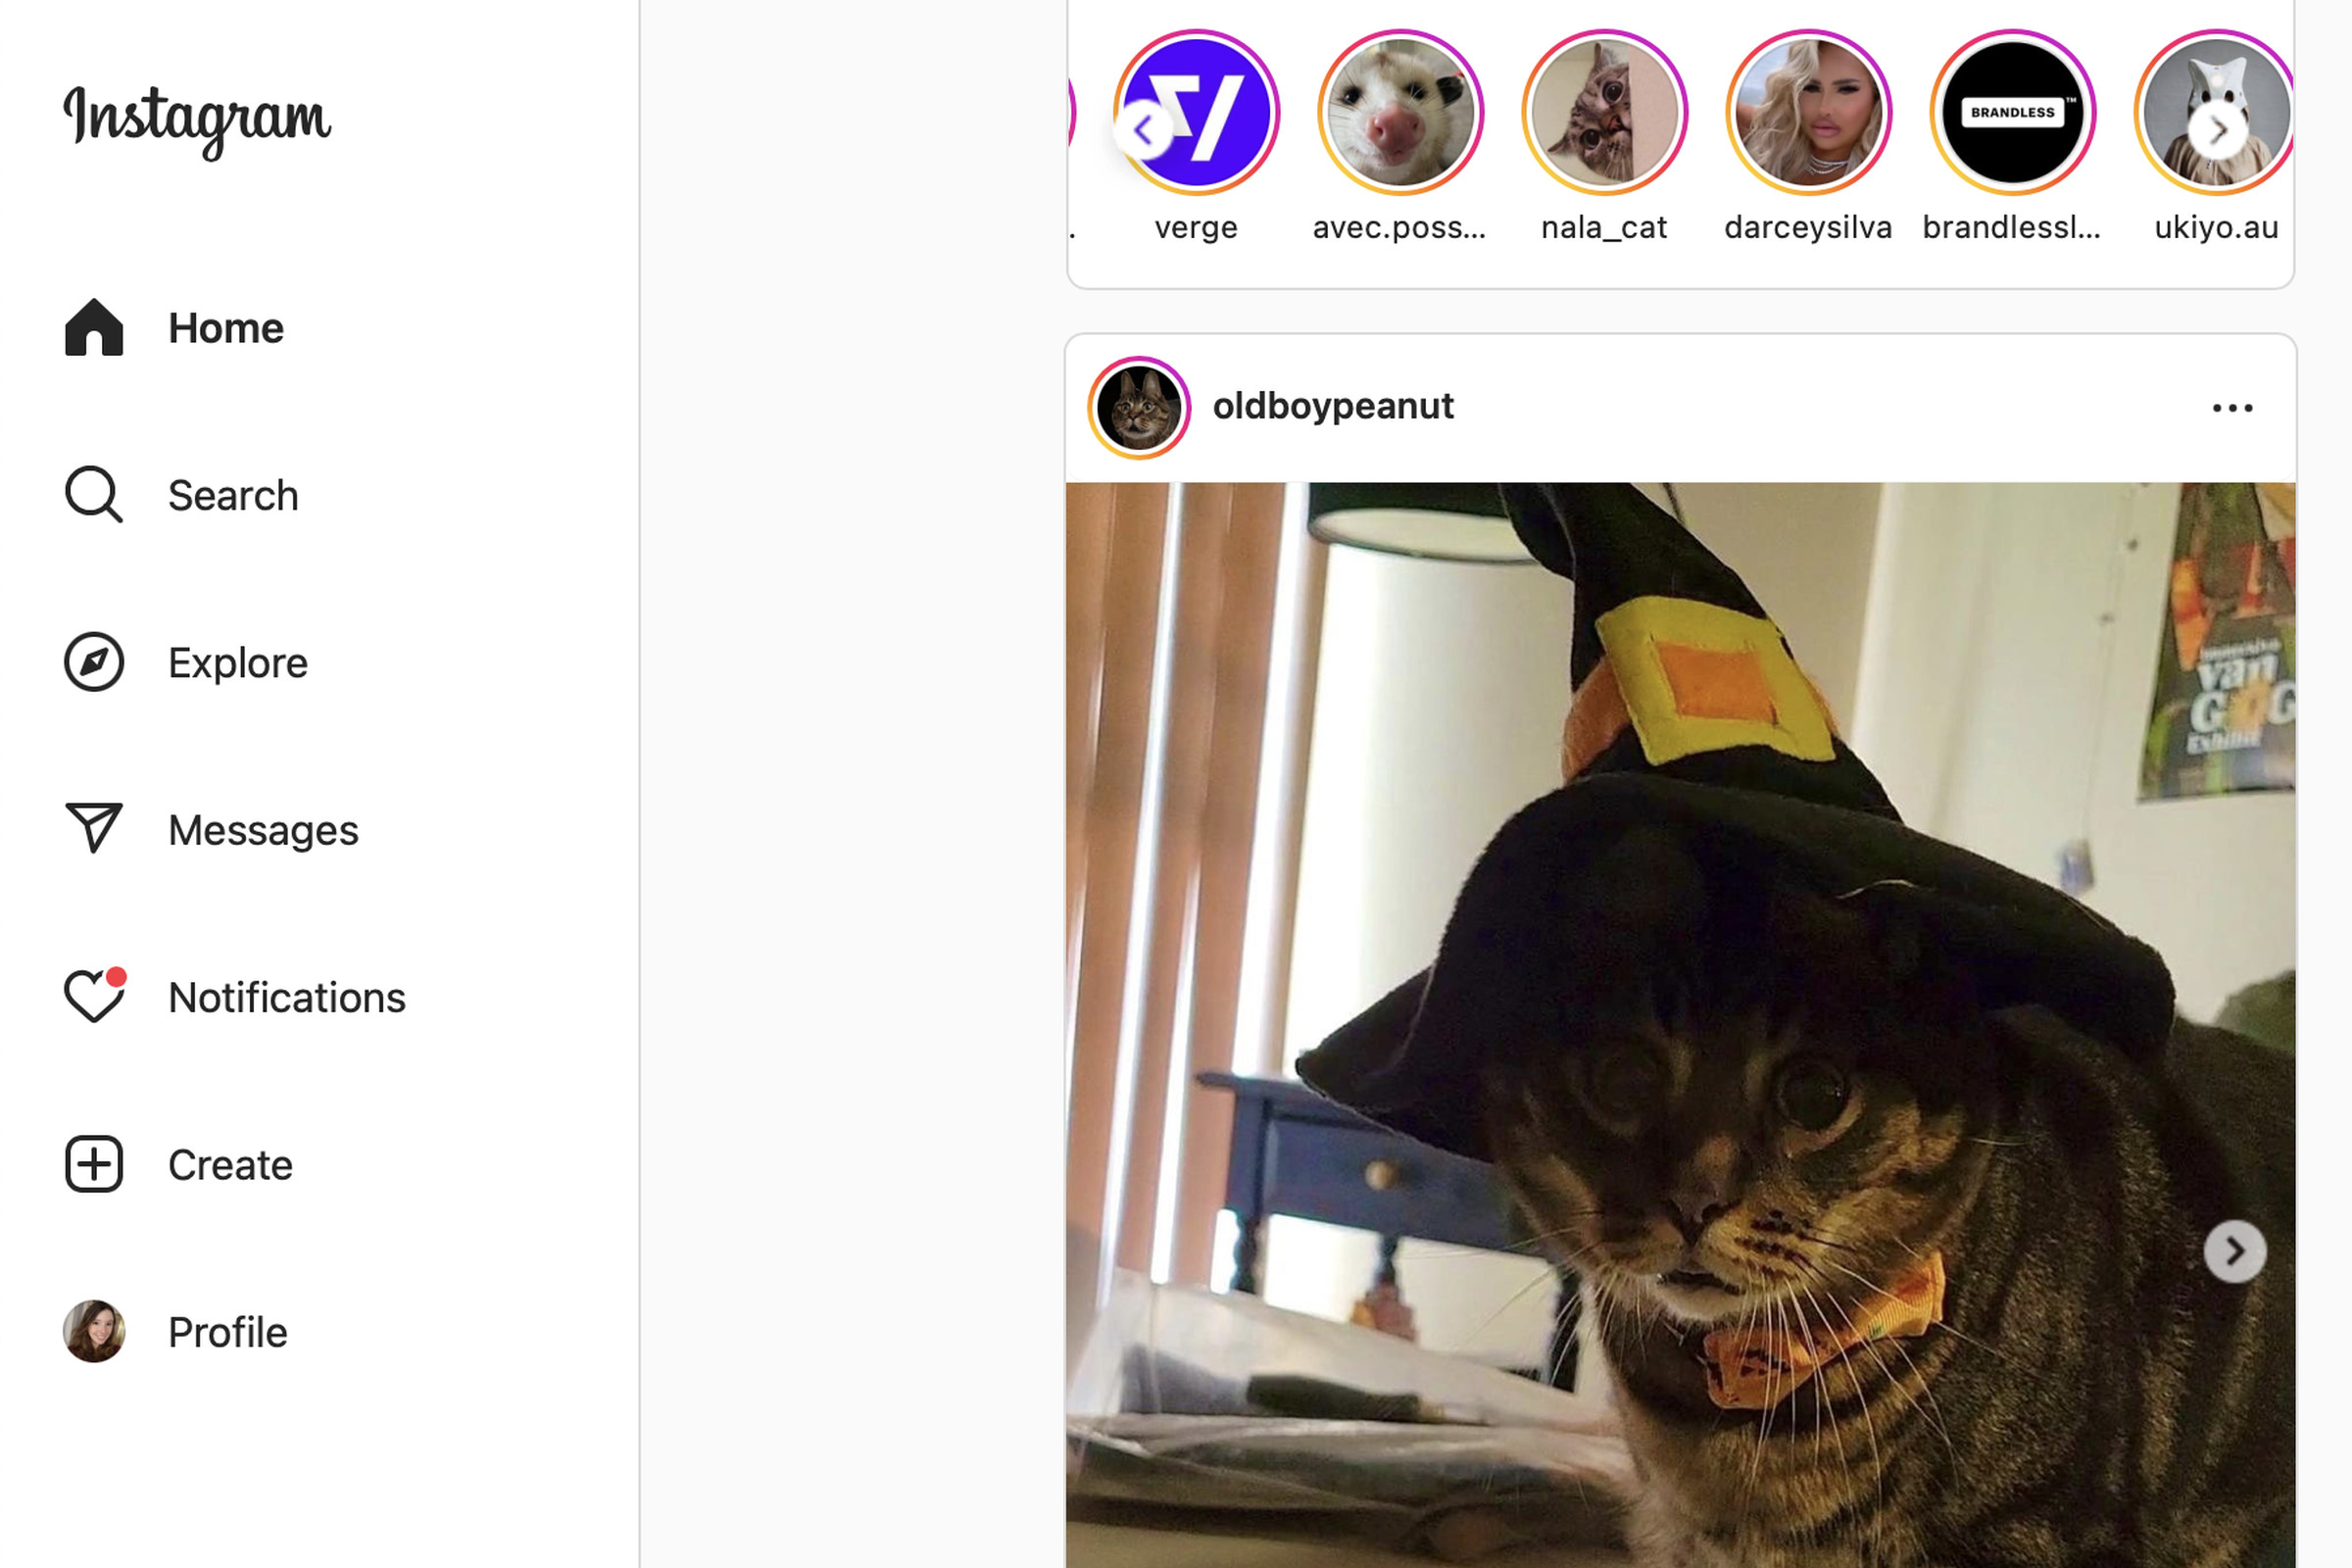 Screenshot of the new Instagram for web design, which features a sidebar navigation scheme.